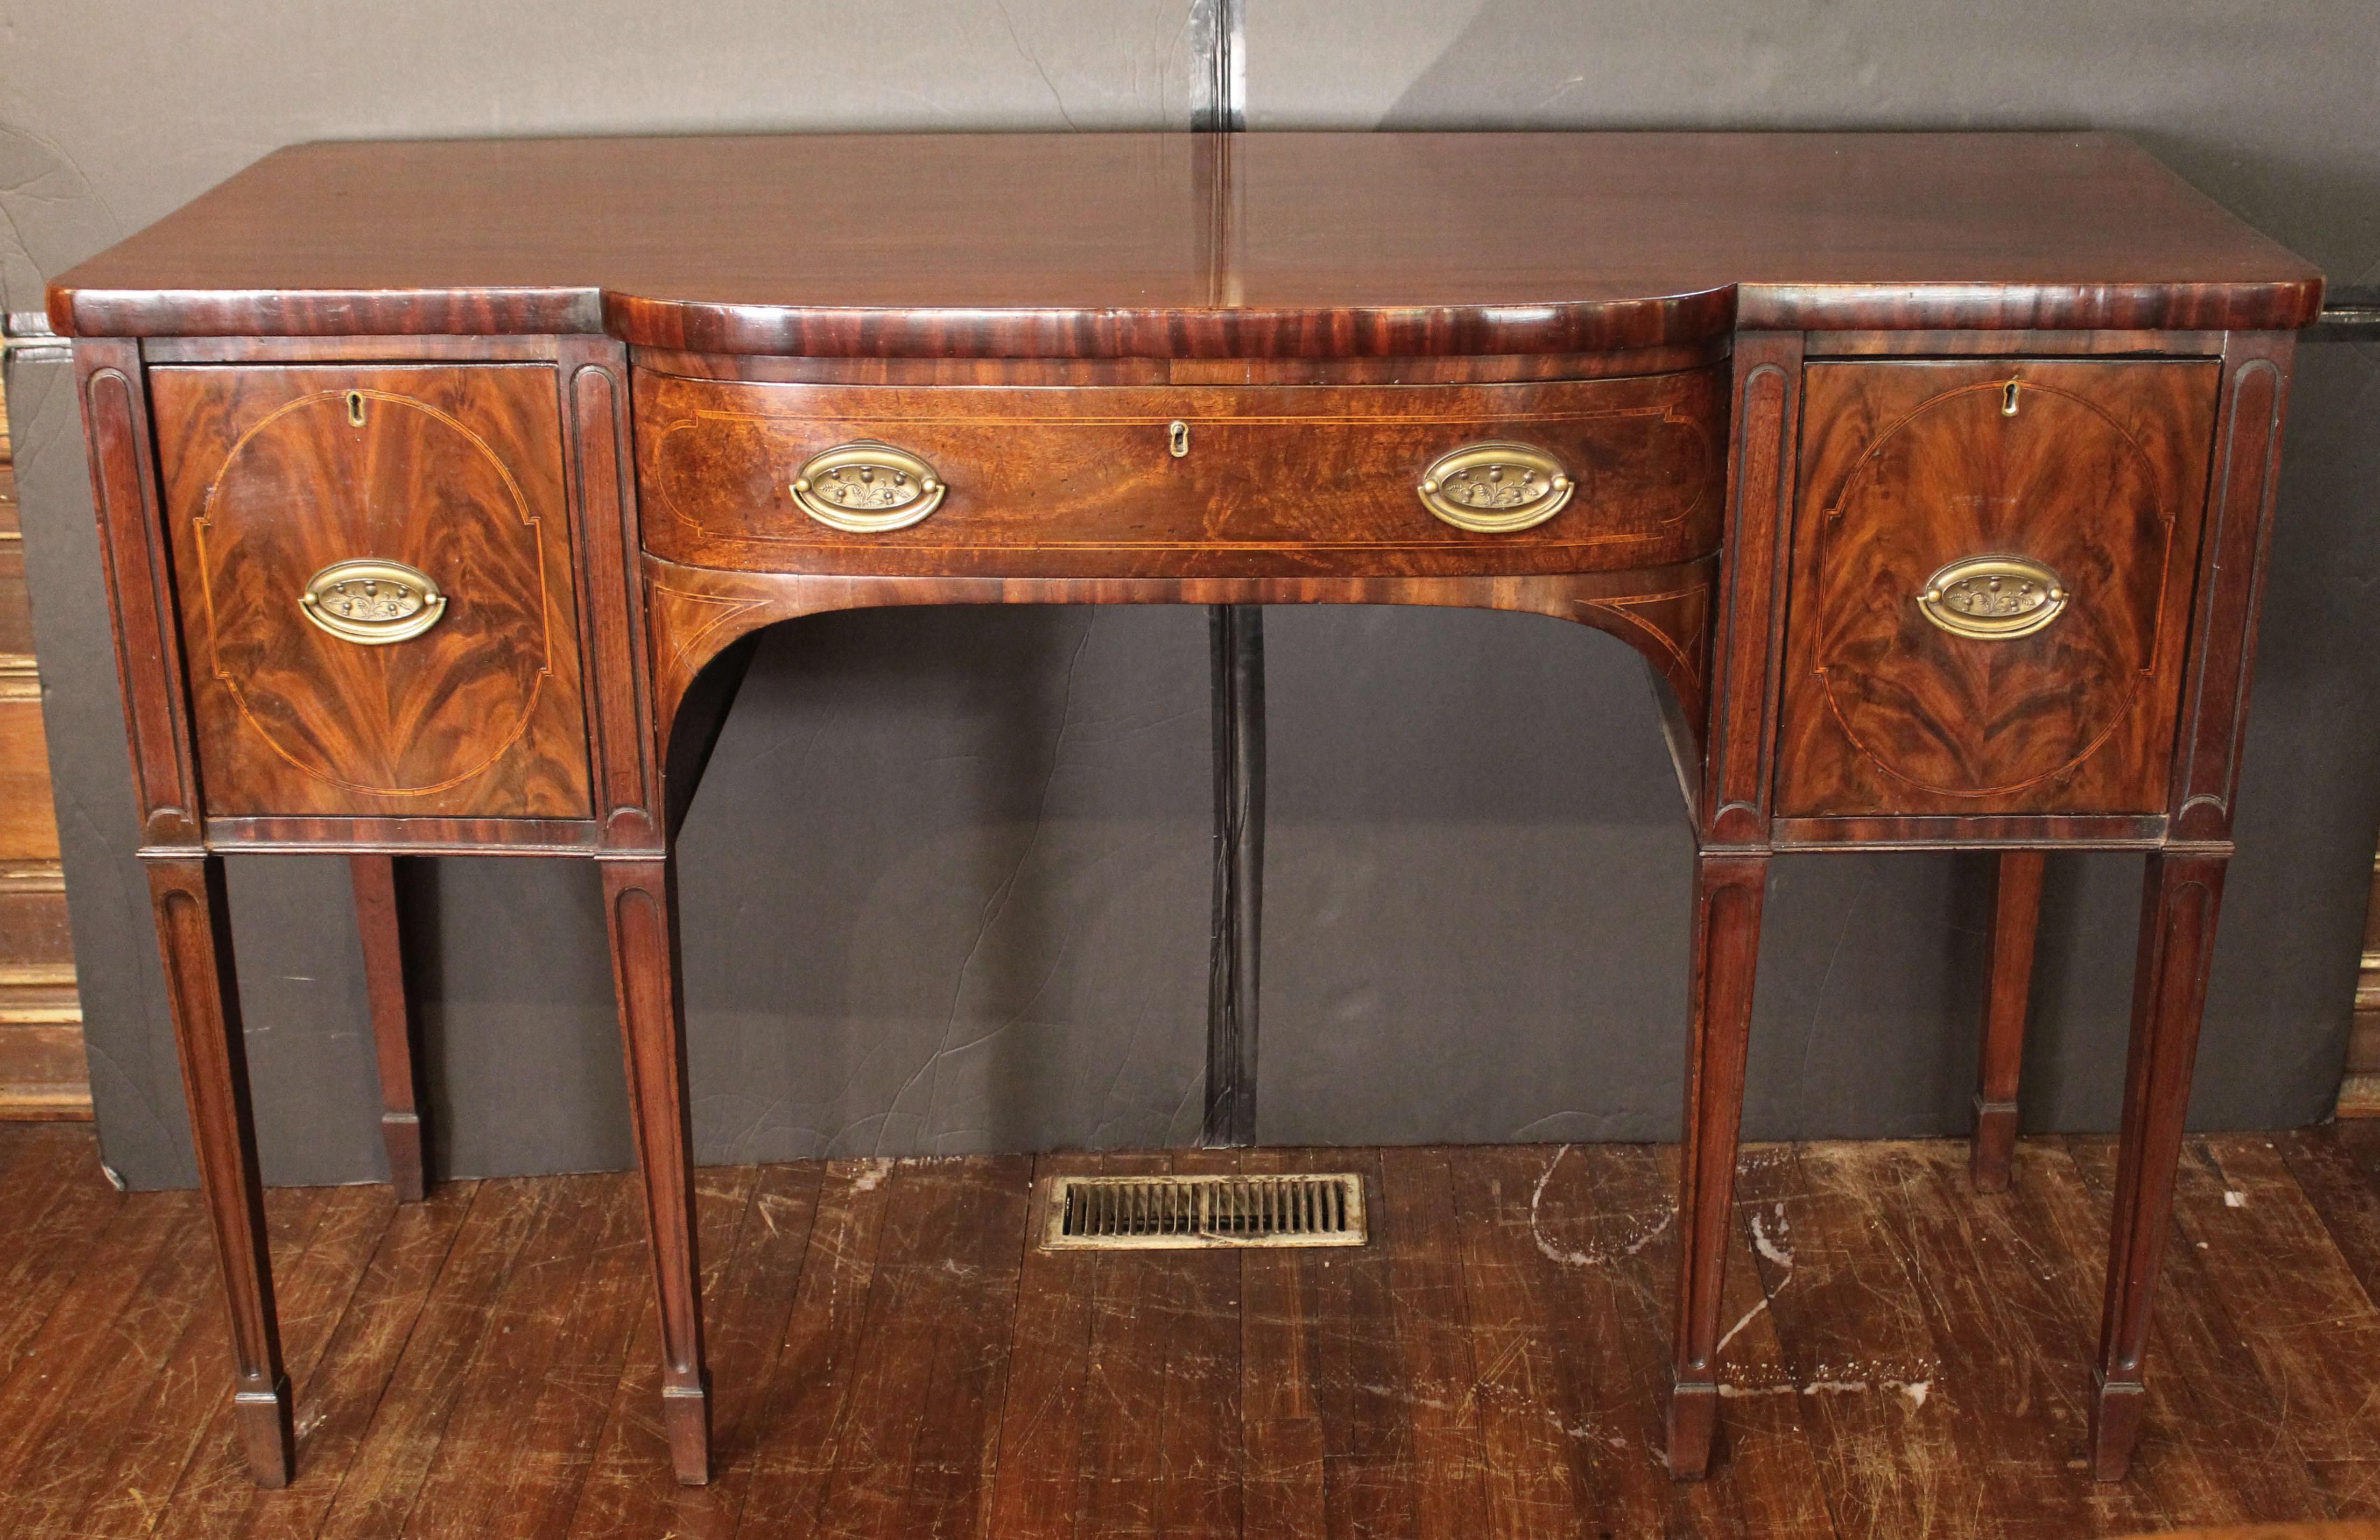 Circa 1780 George III sideboard, English. Mahogany with oak & pine secondary wood. Bow center breakfront form. Raised on straight, tapered legs with elongated oval fluting carrying on the carved motif flanking the drawers, ending in spade feet.